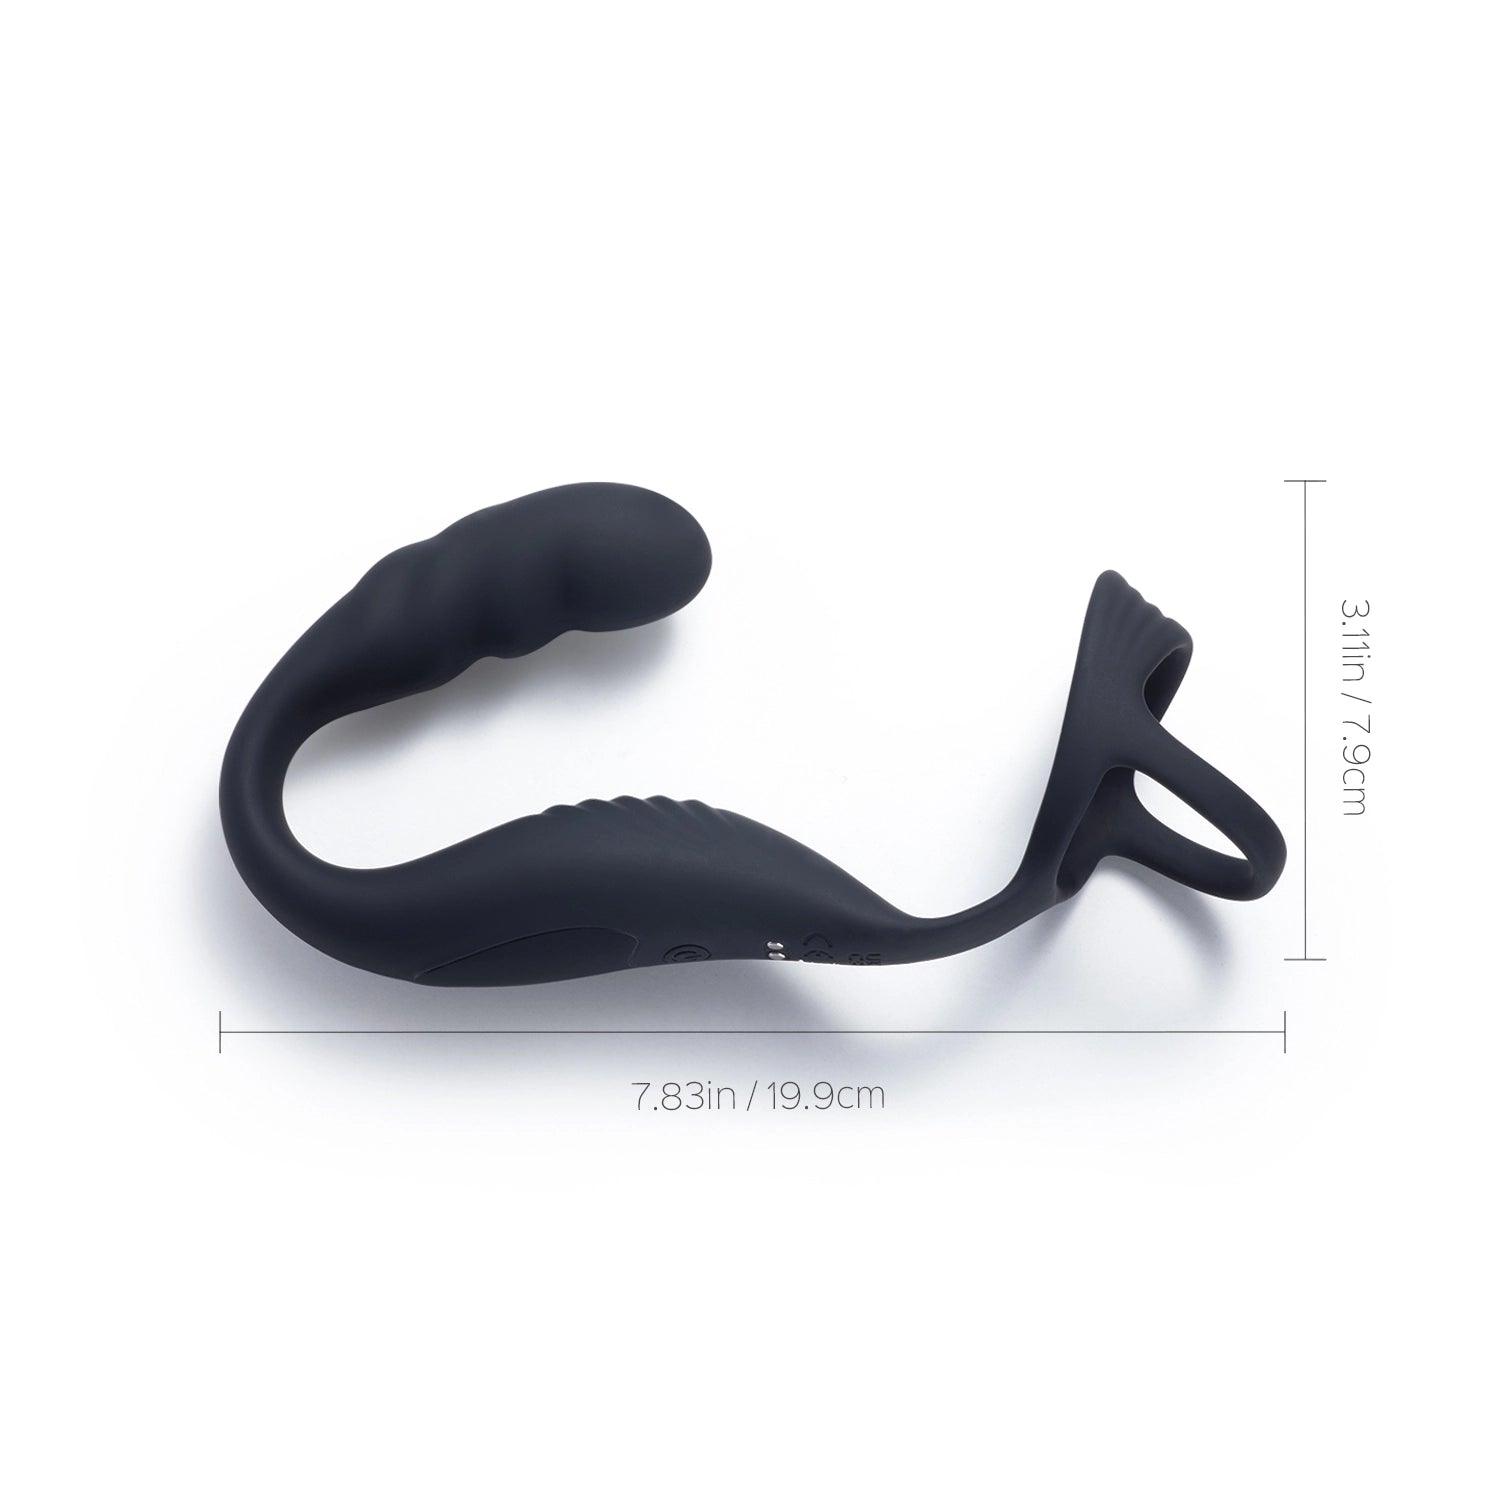 CASPION Double Cock Ring Remote Control Vibrating Perineum Prostate Massager - Honey Play Box Official